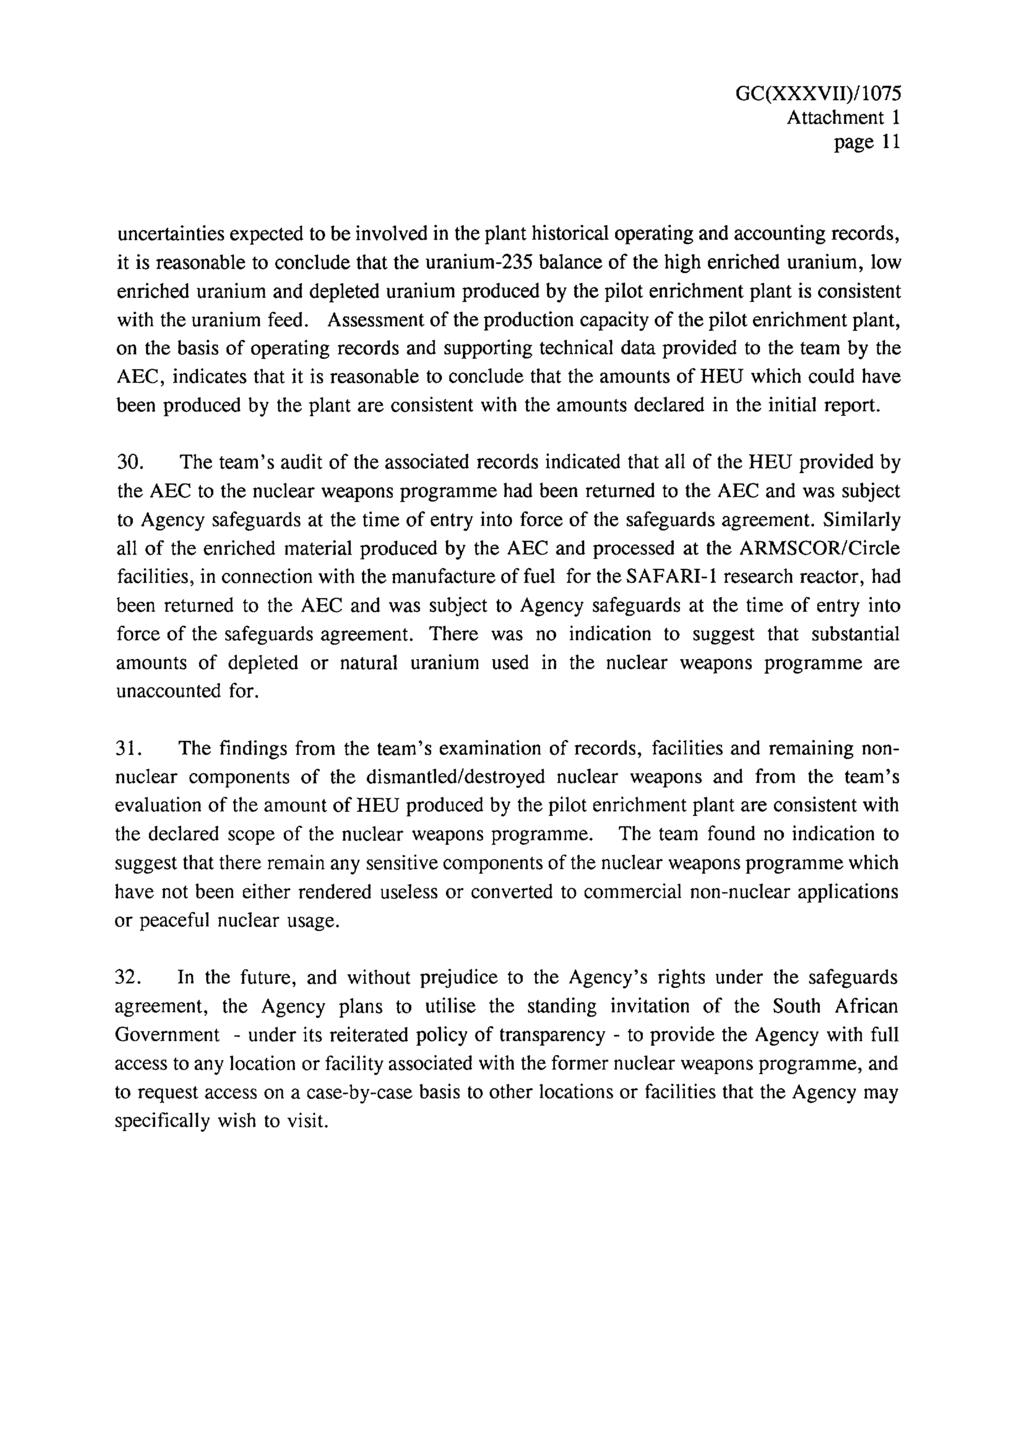 page 11 uncertainties expected to be involved in the plant historical operating and accounting records, it is reasonable to conclude that the uranium-235 balance of the high enriched uranium, low